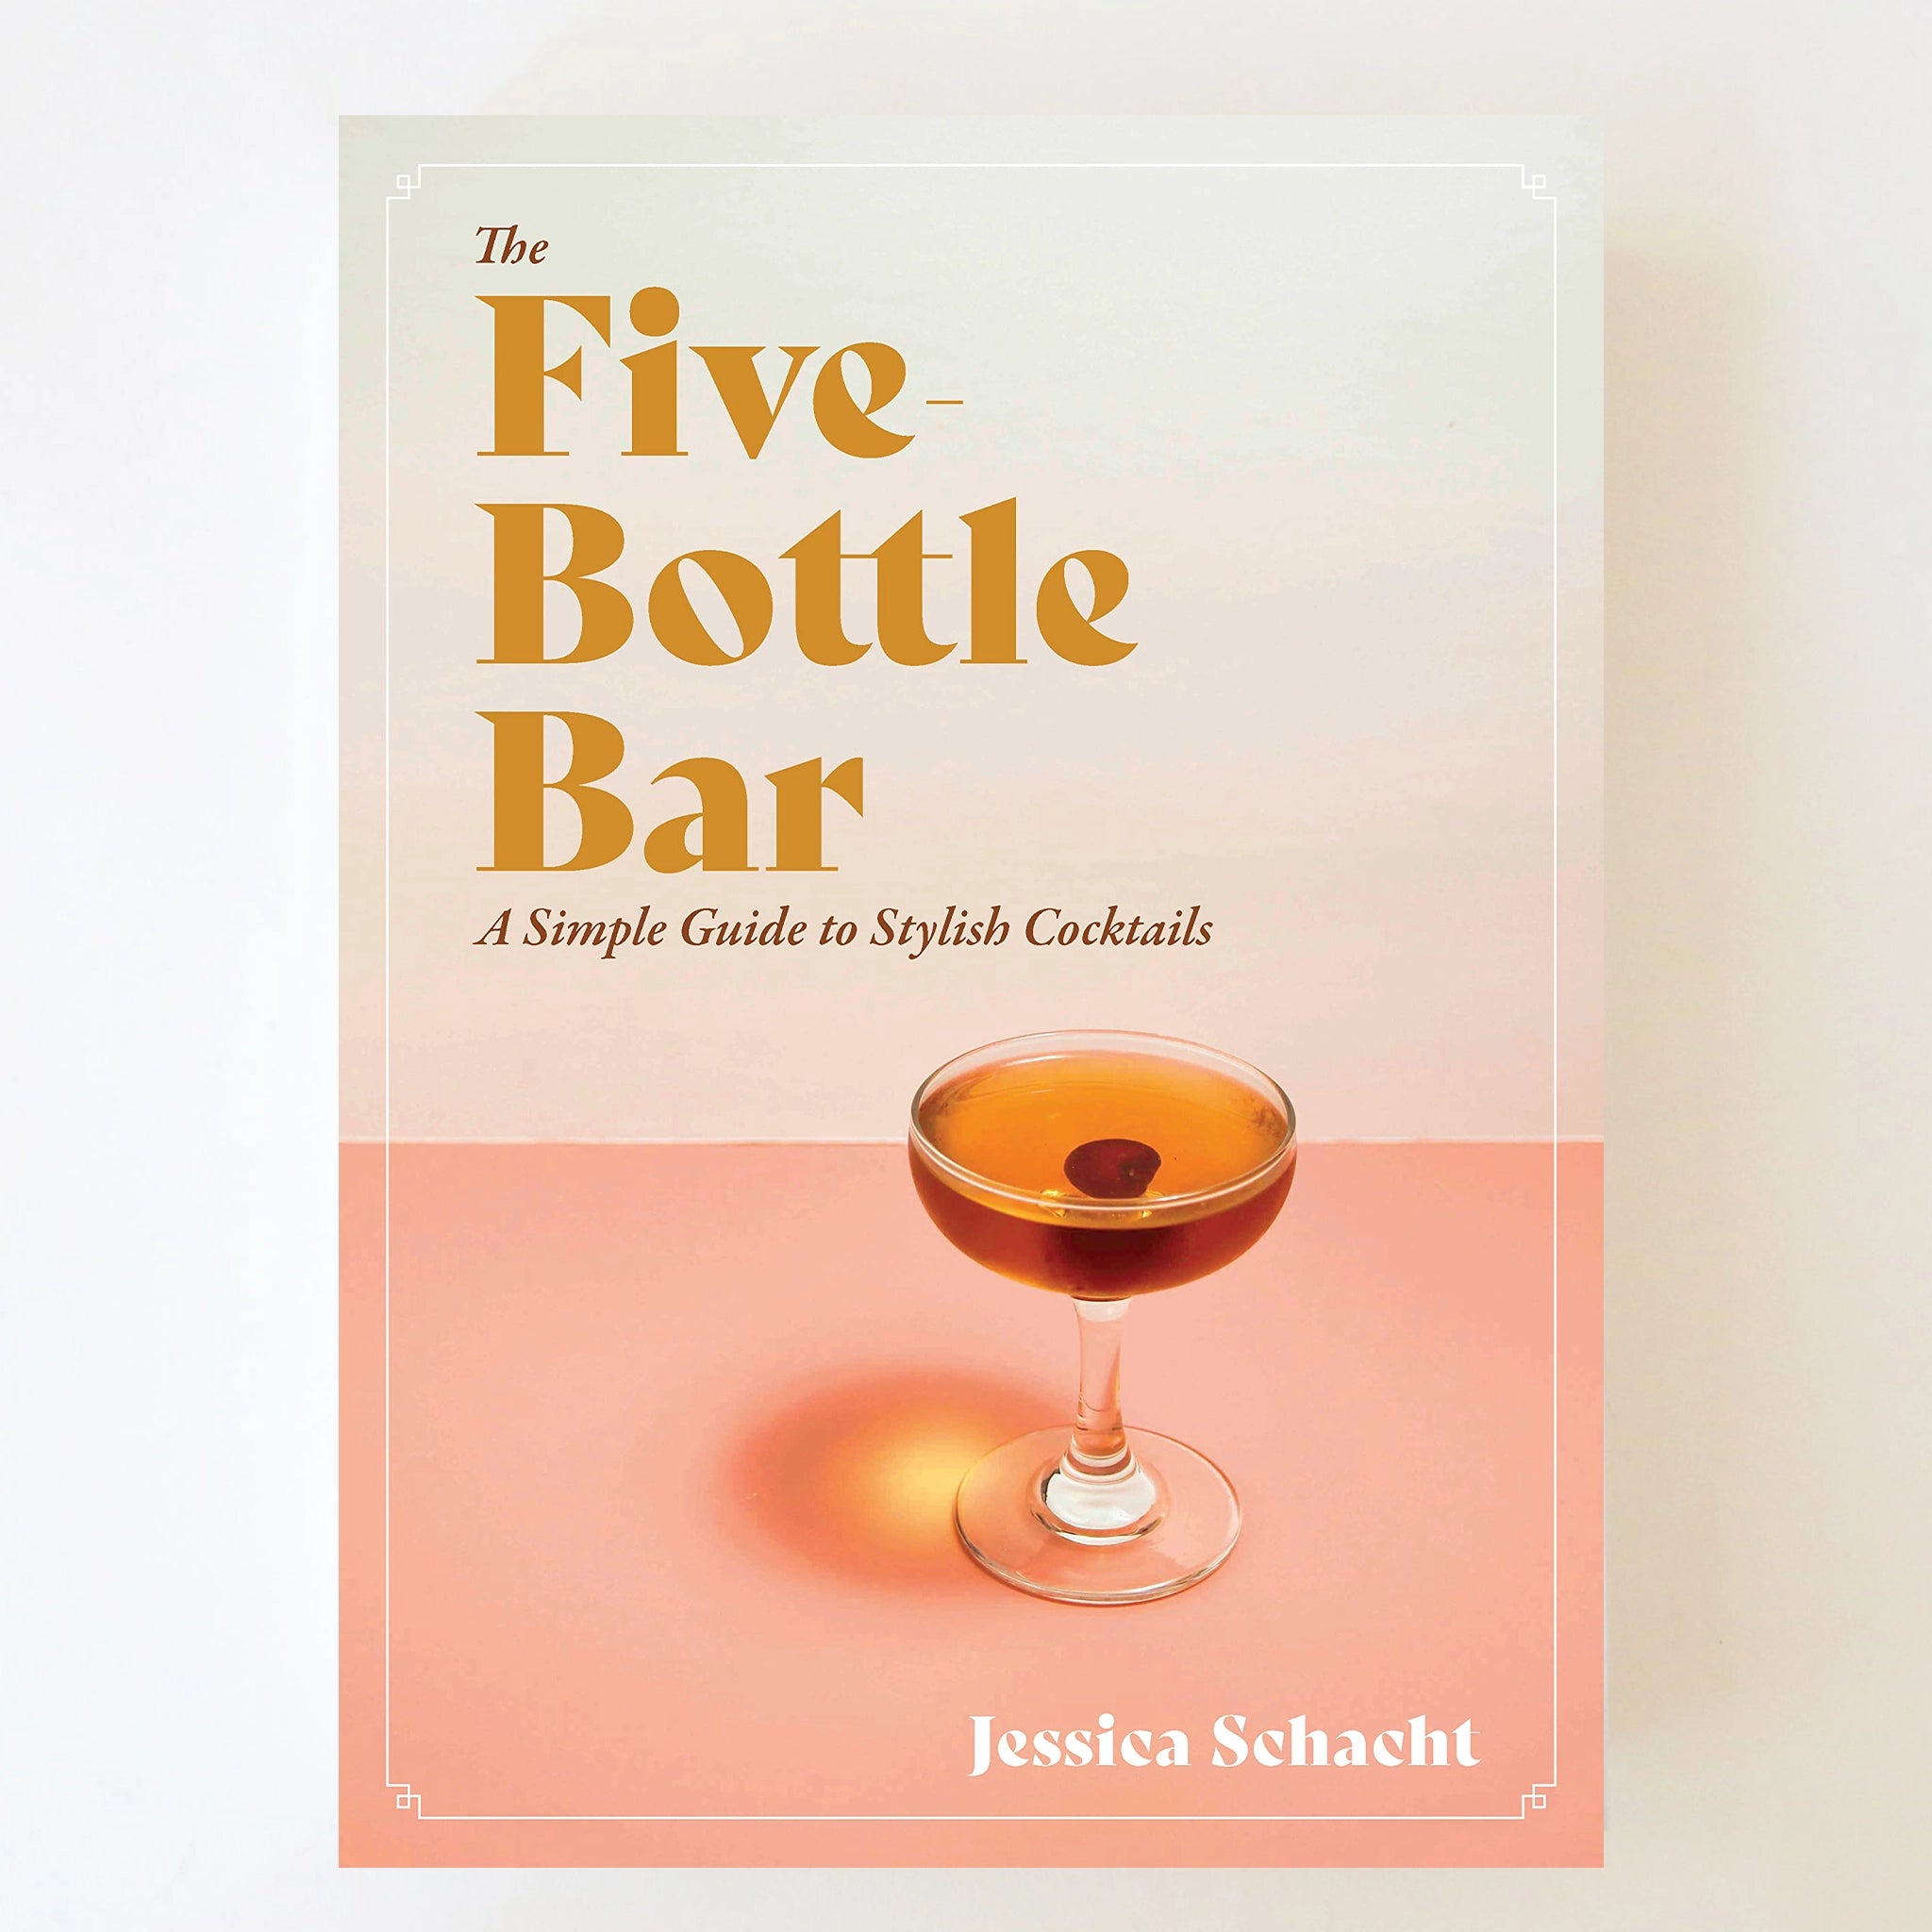 A cream and light pink book cover with a photograph of a coupe cocktail glass filled with an orange liquid along with orange text in the top left corner that reads, "The Five Bottle Bar, A Simple Guide to Stylish Cocktails".